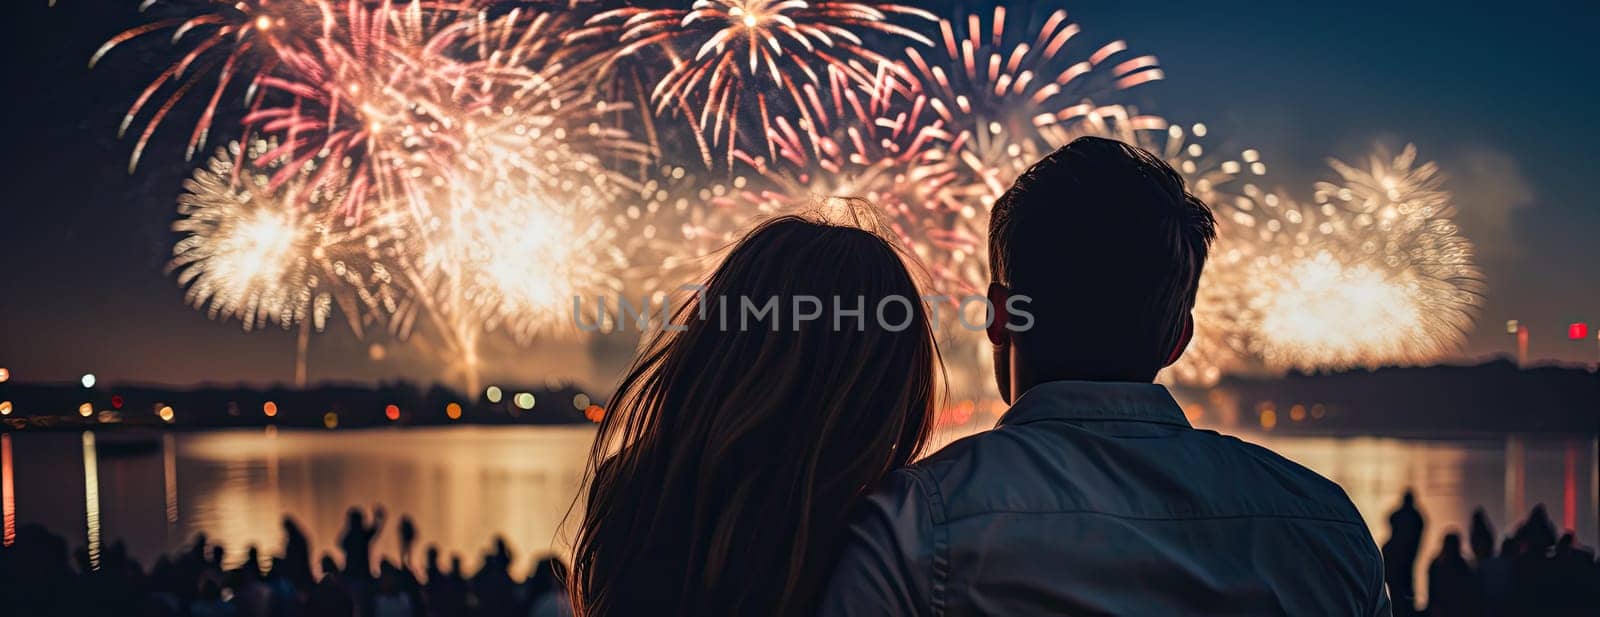 Silhouette of a couple in love looking beautiful fireworks in the night sky by papatonic